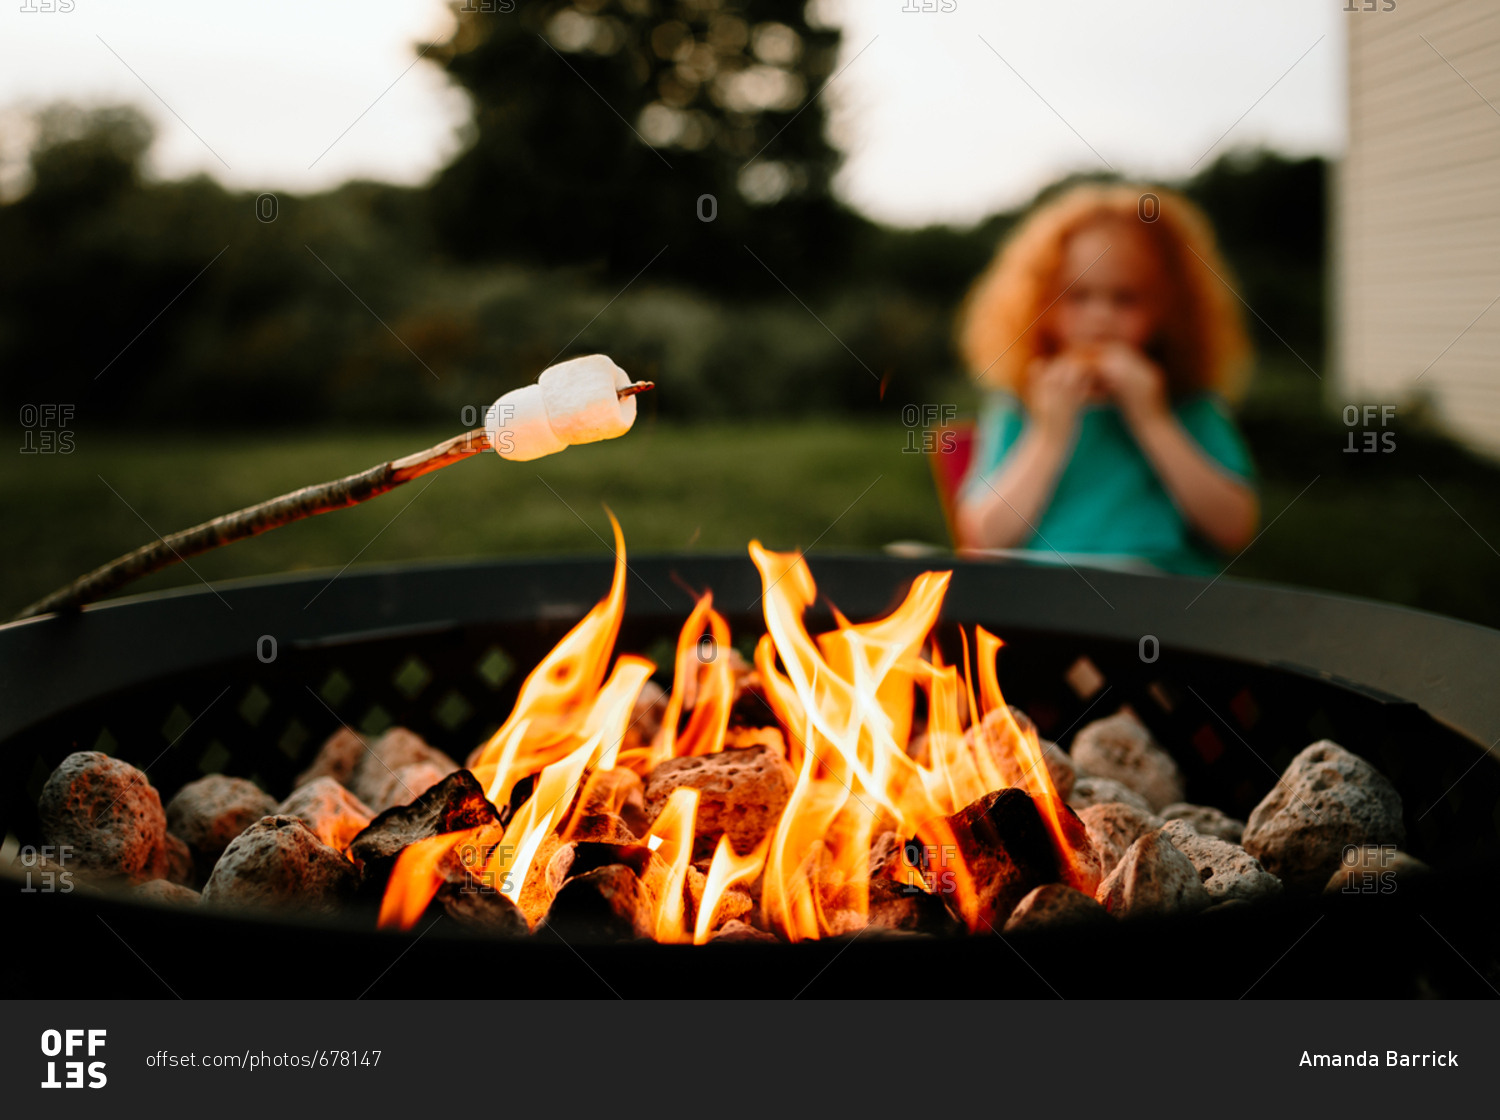 Marshmallow roasting over fire pit in front of little boy eating s\'more